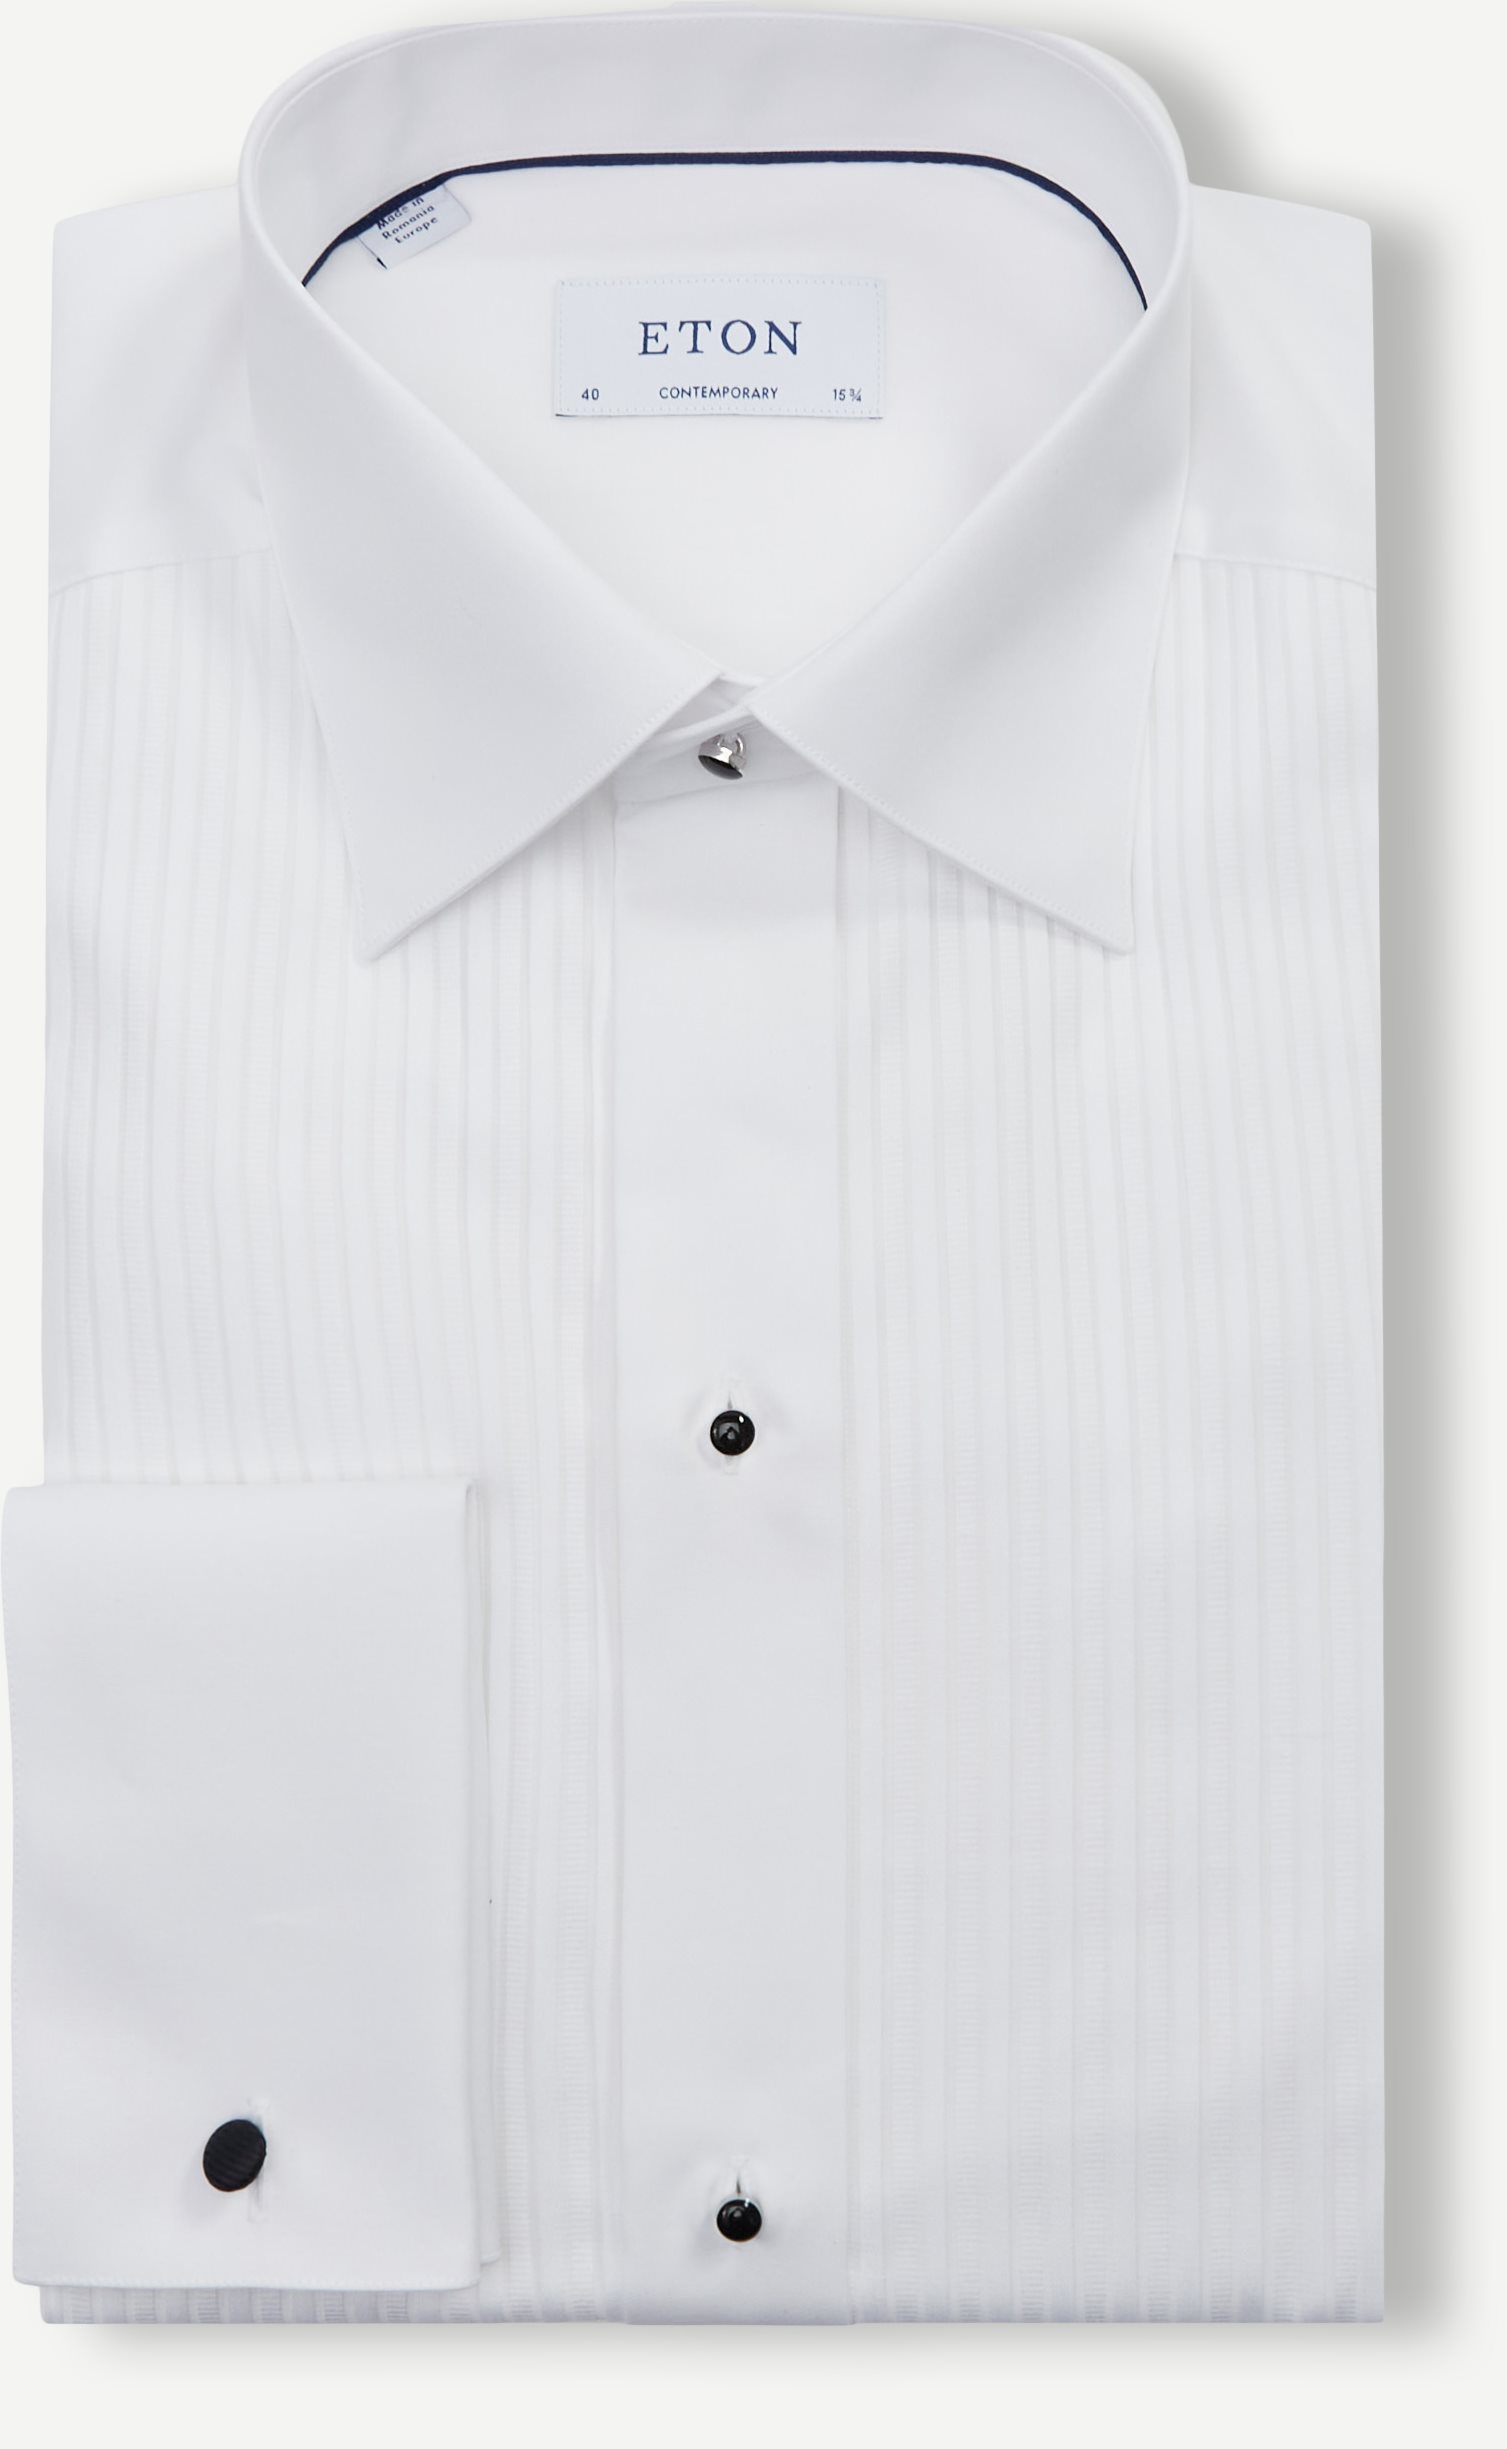 Shirts - Contemporary fit - White